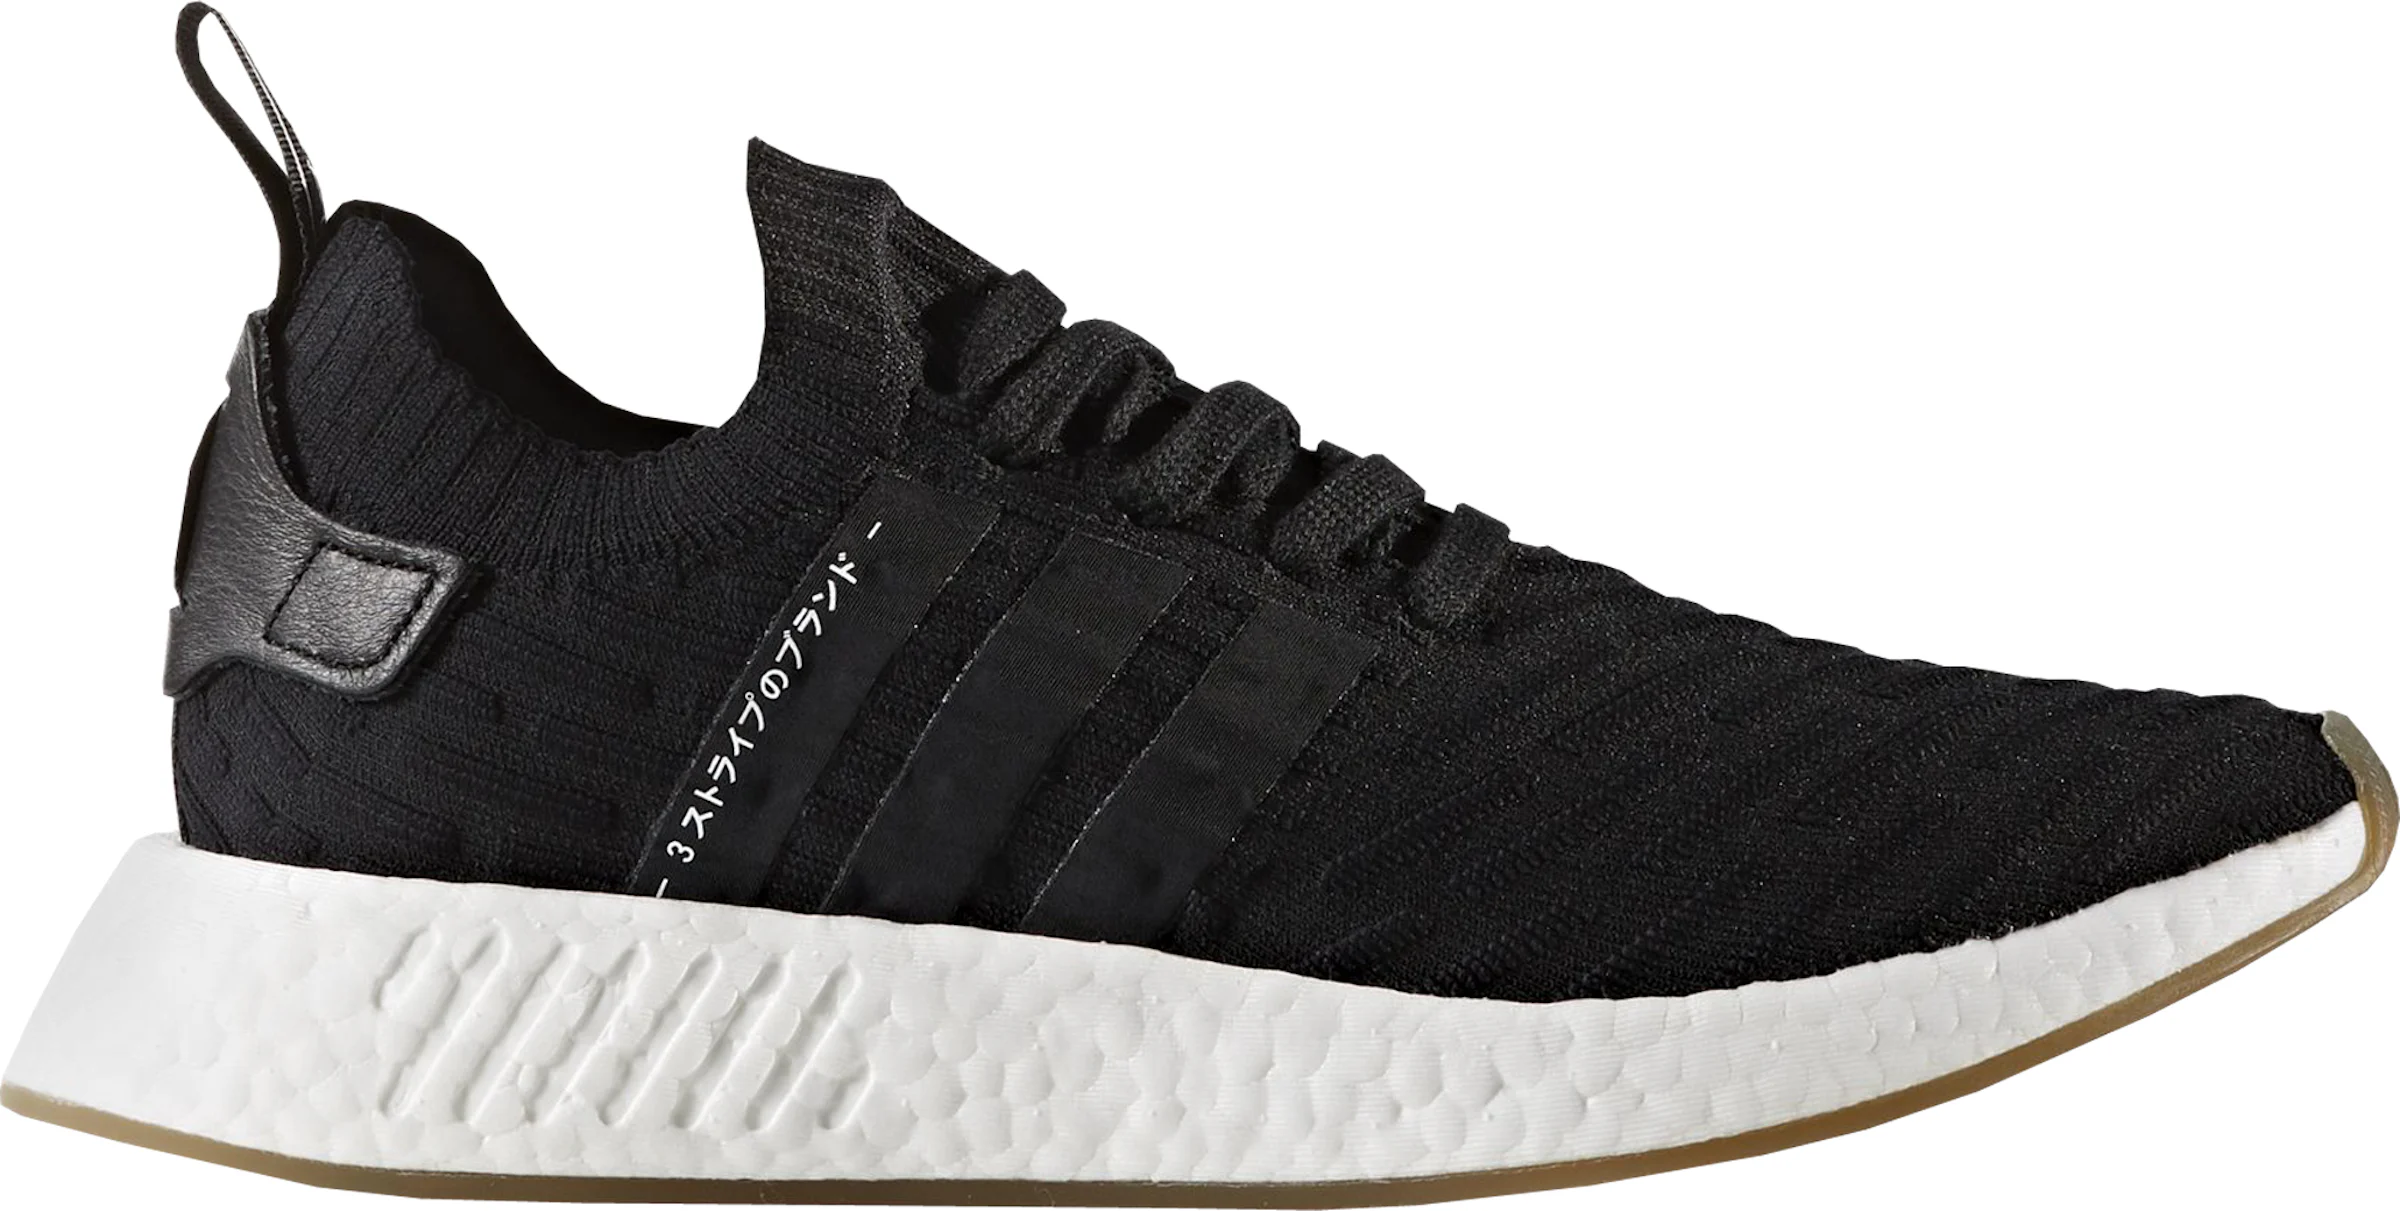 Buy adidas NMD R2 Shoes & New Sneakers - StockX